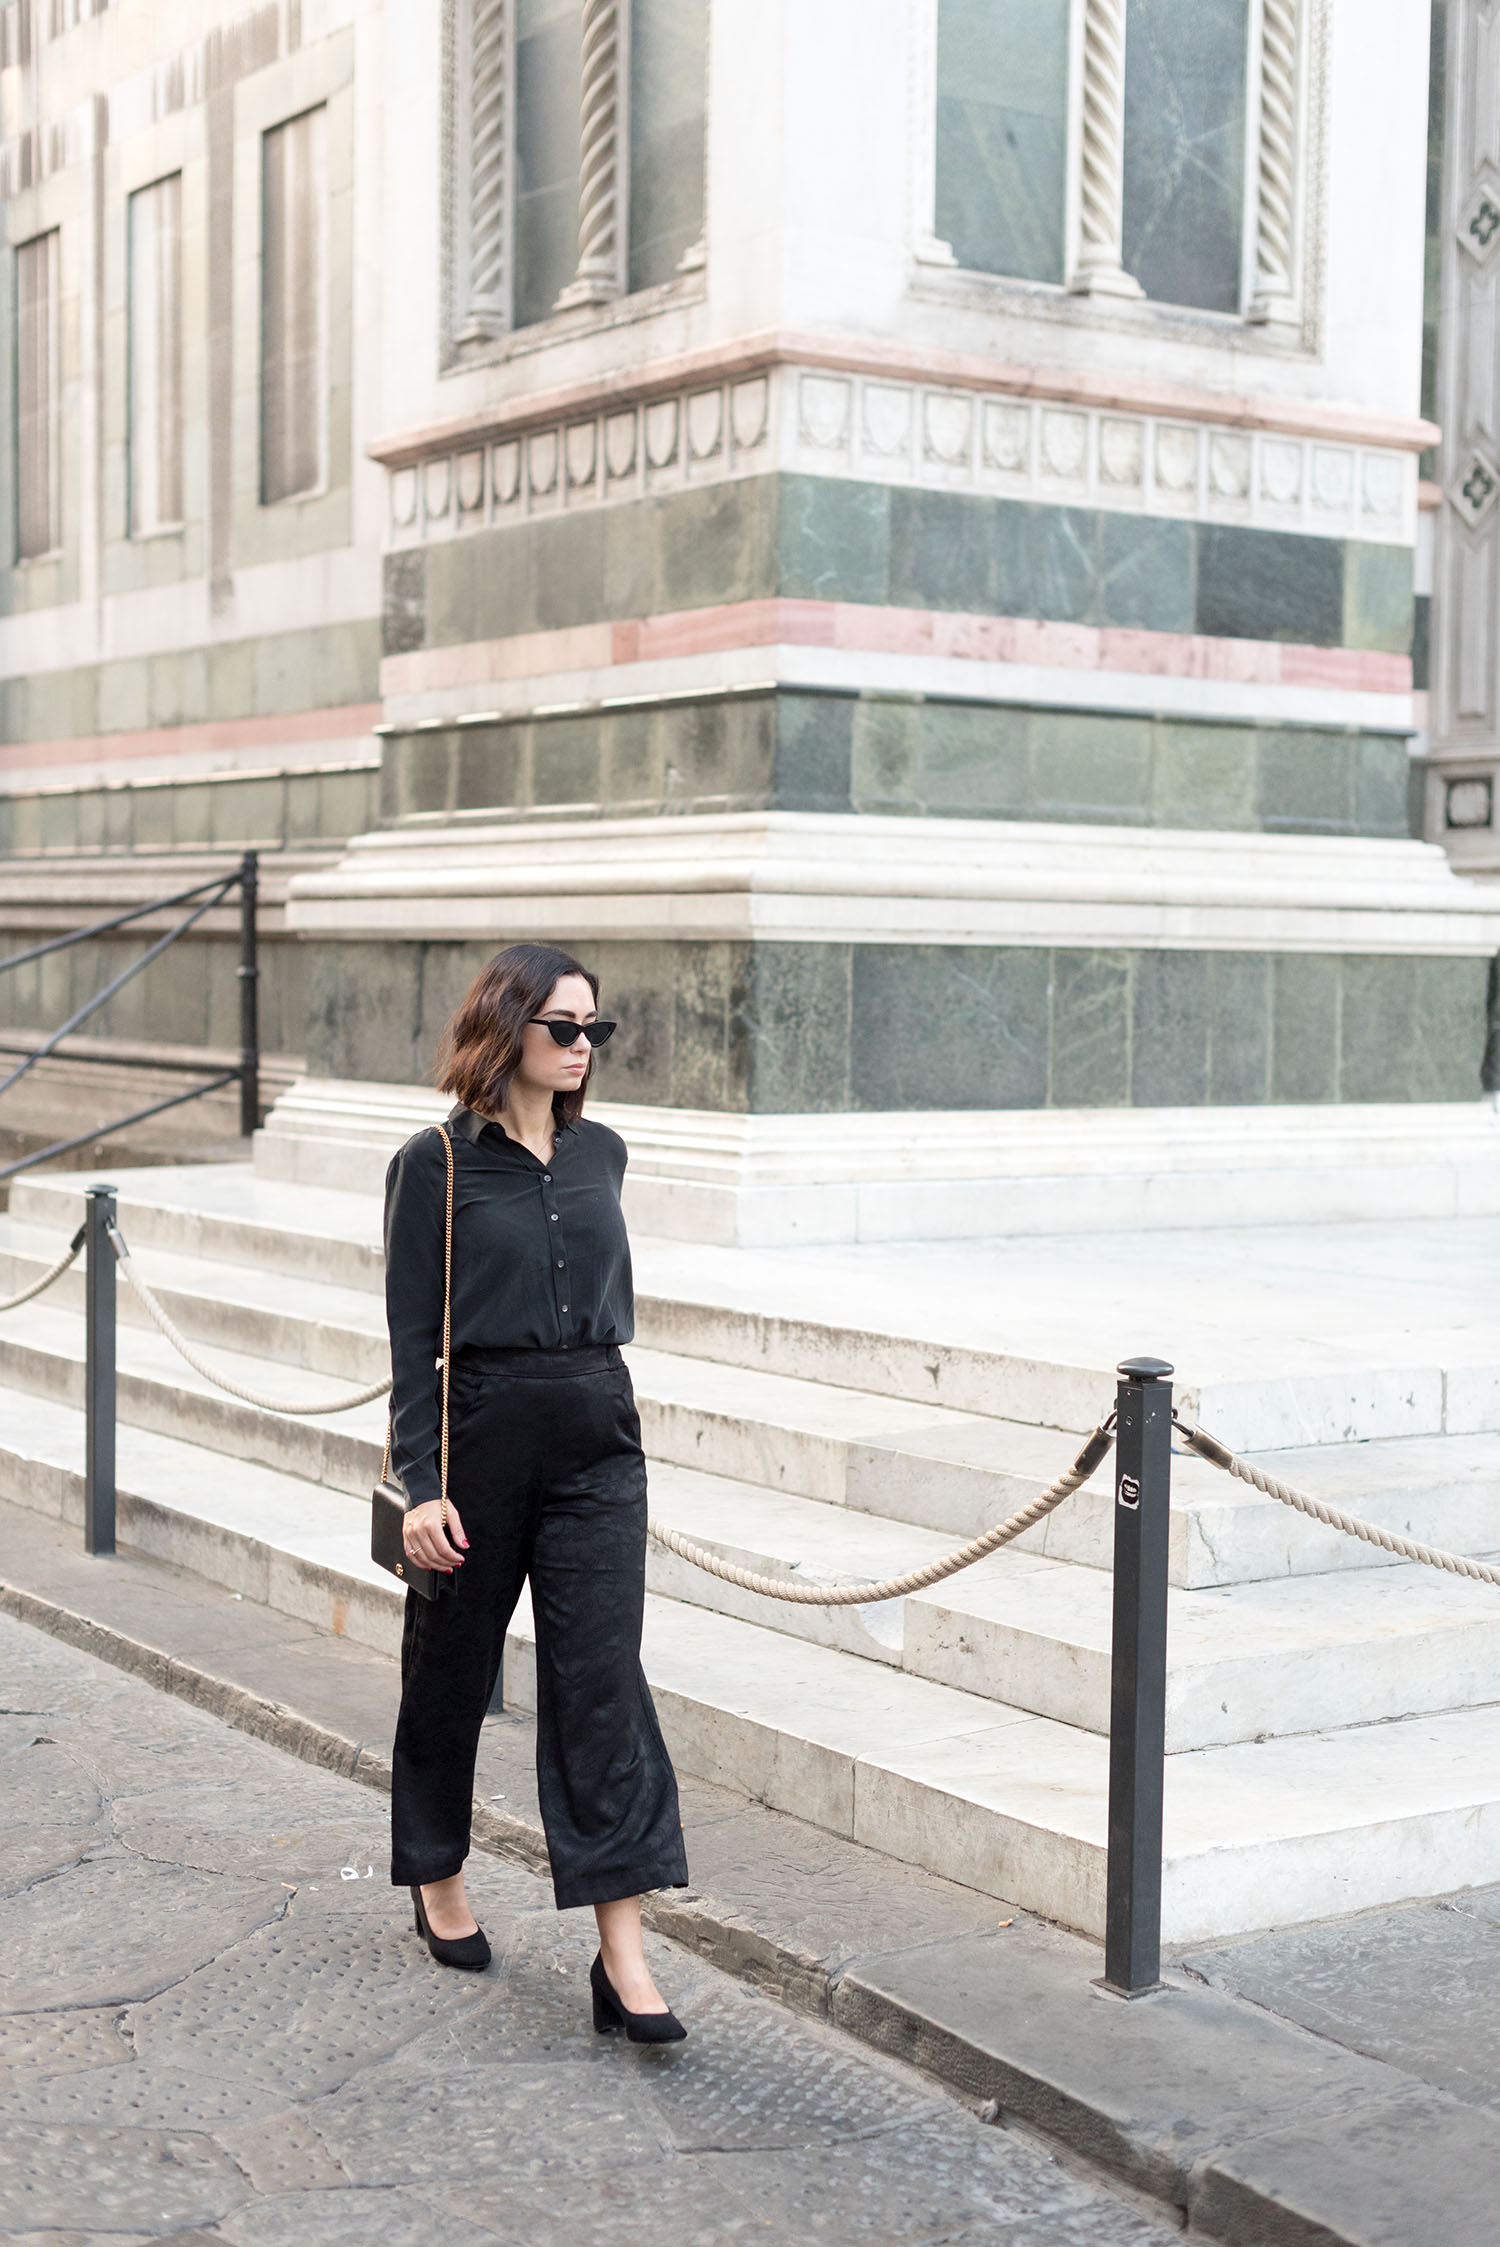 Top Winnipeg fashion blogger Cee Fardoe of Coco & Vera walks outside the Duomo in Florence, wearing an Everlane blouse and H&M block heels